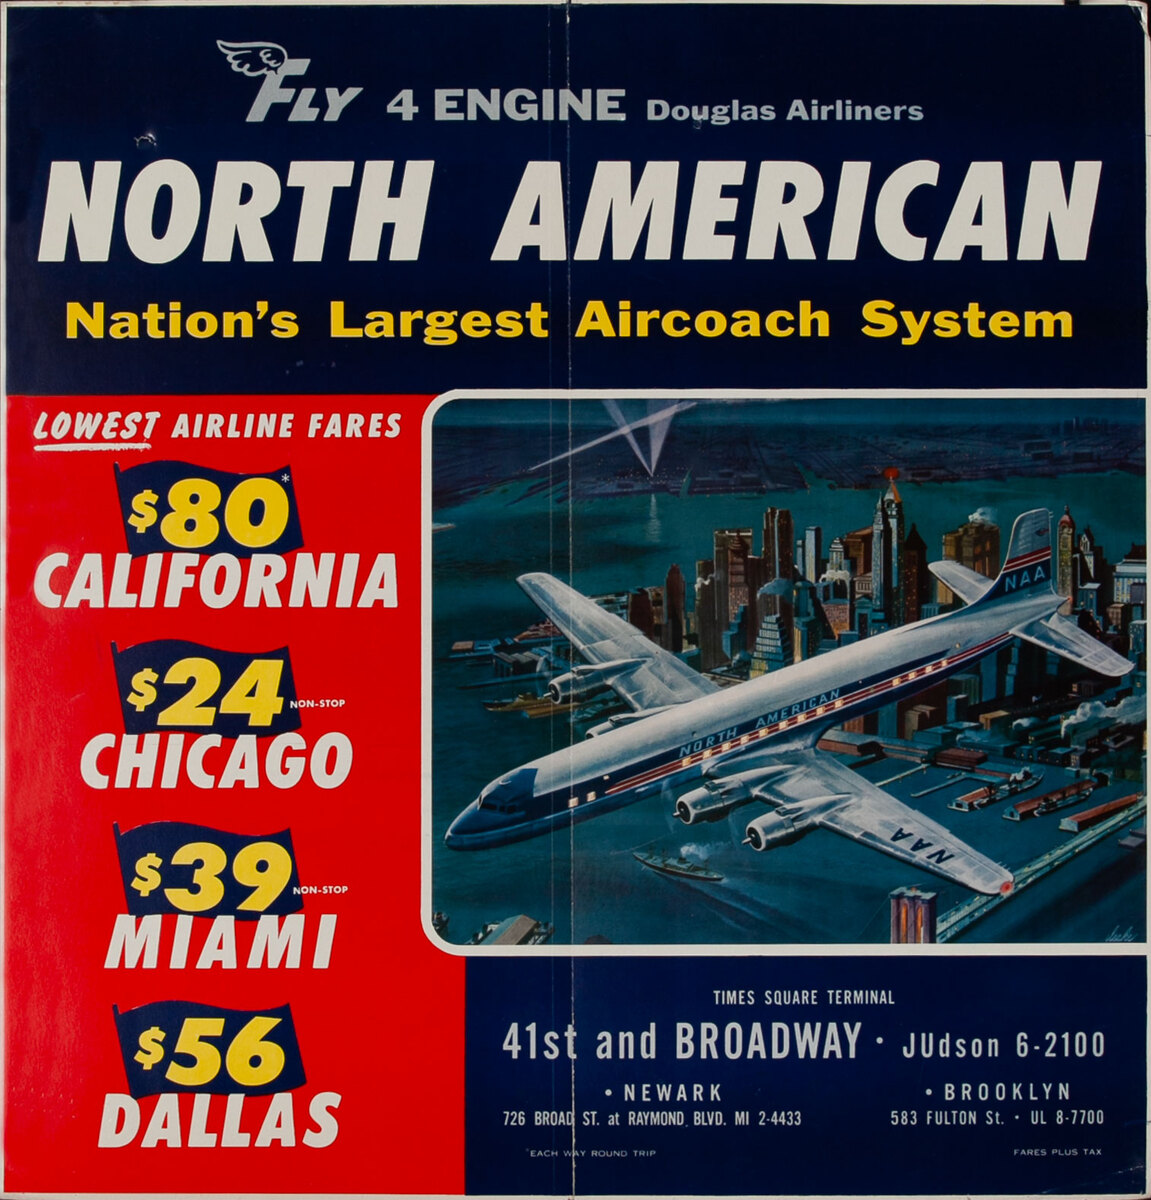 North American Airlines, Fly 4 Engine Douglas Airliners